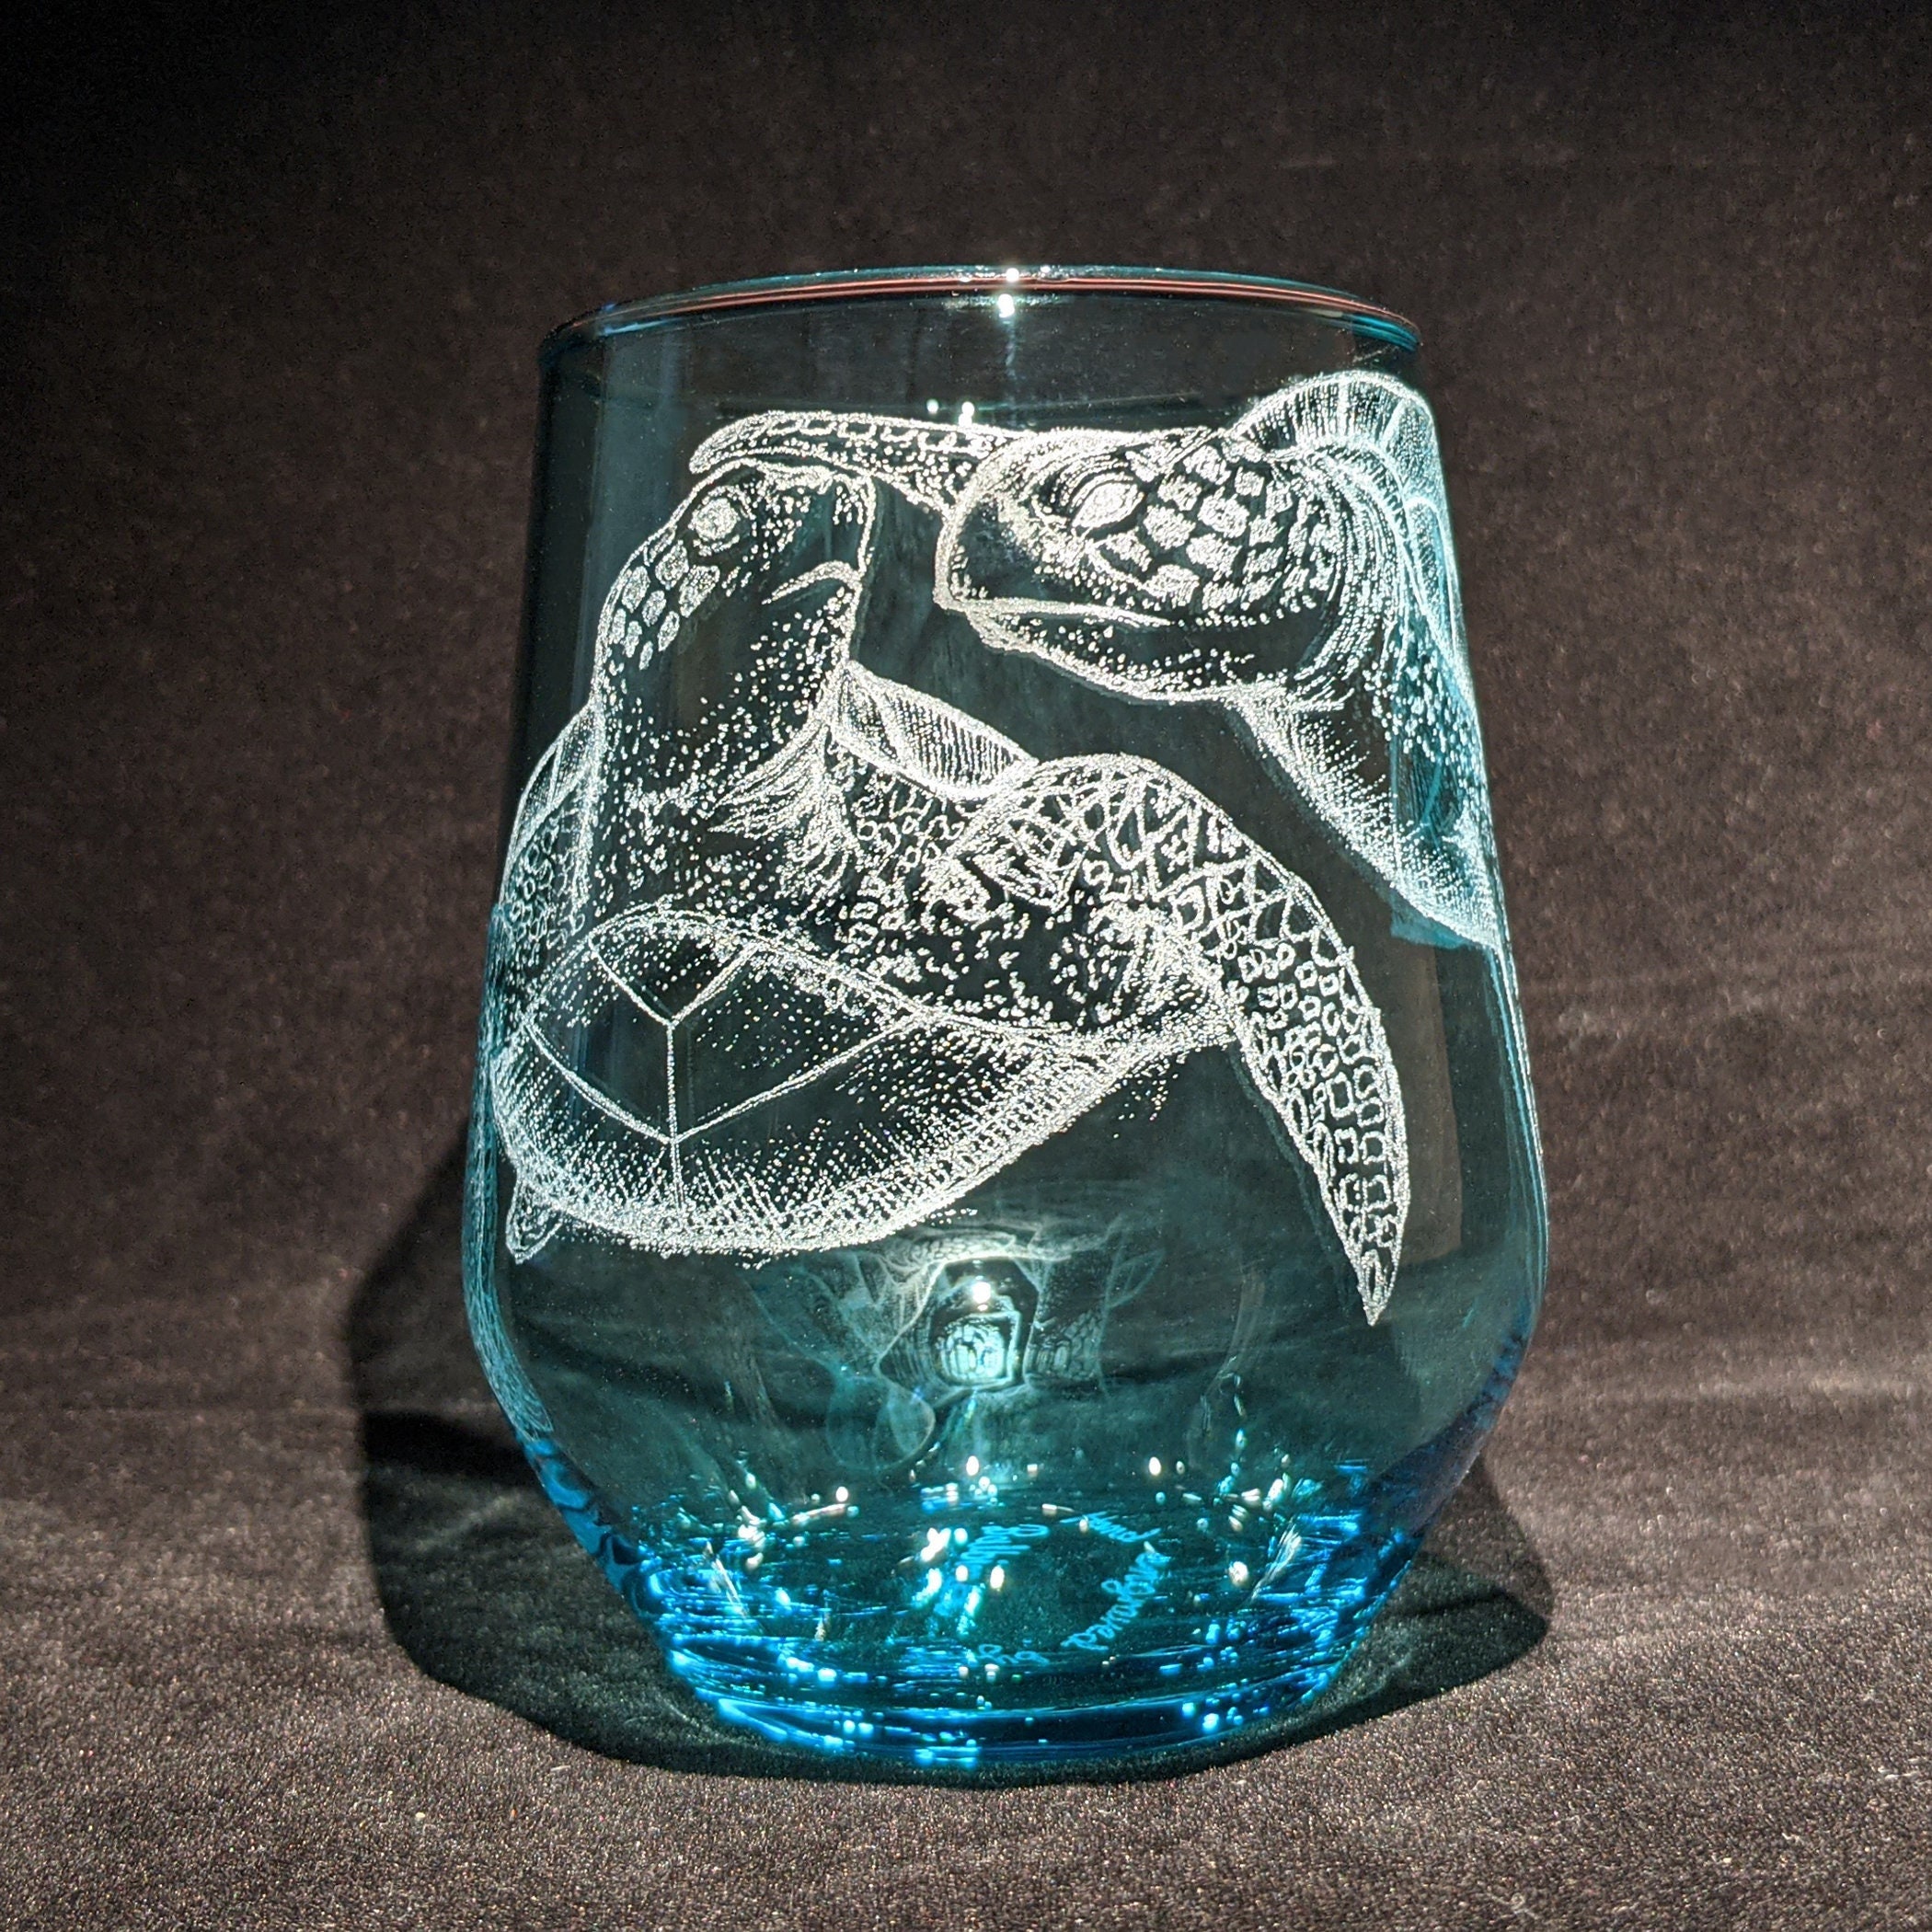 Choose Your Crackle Wine Glass with Tribal Sea Animal Designs - Integrity  Bottles